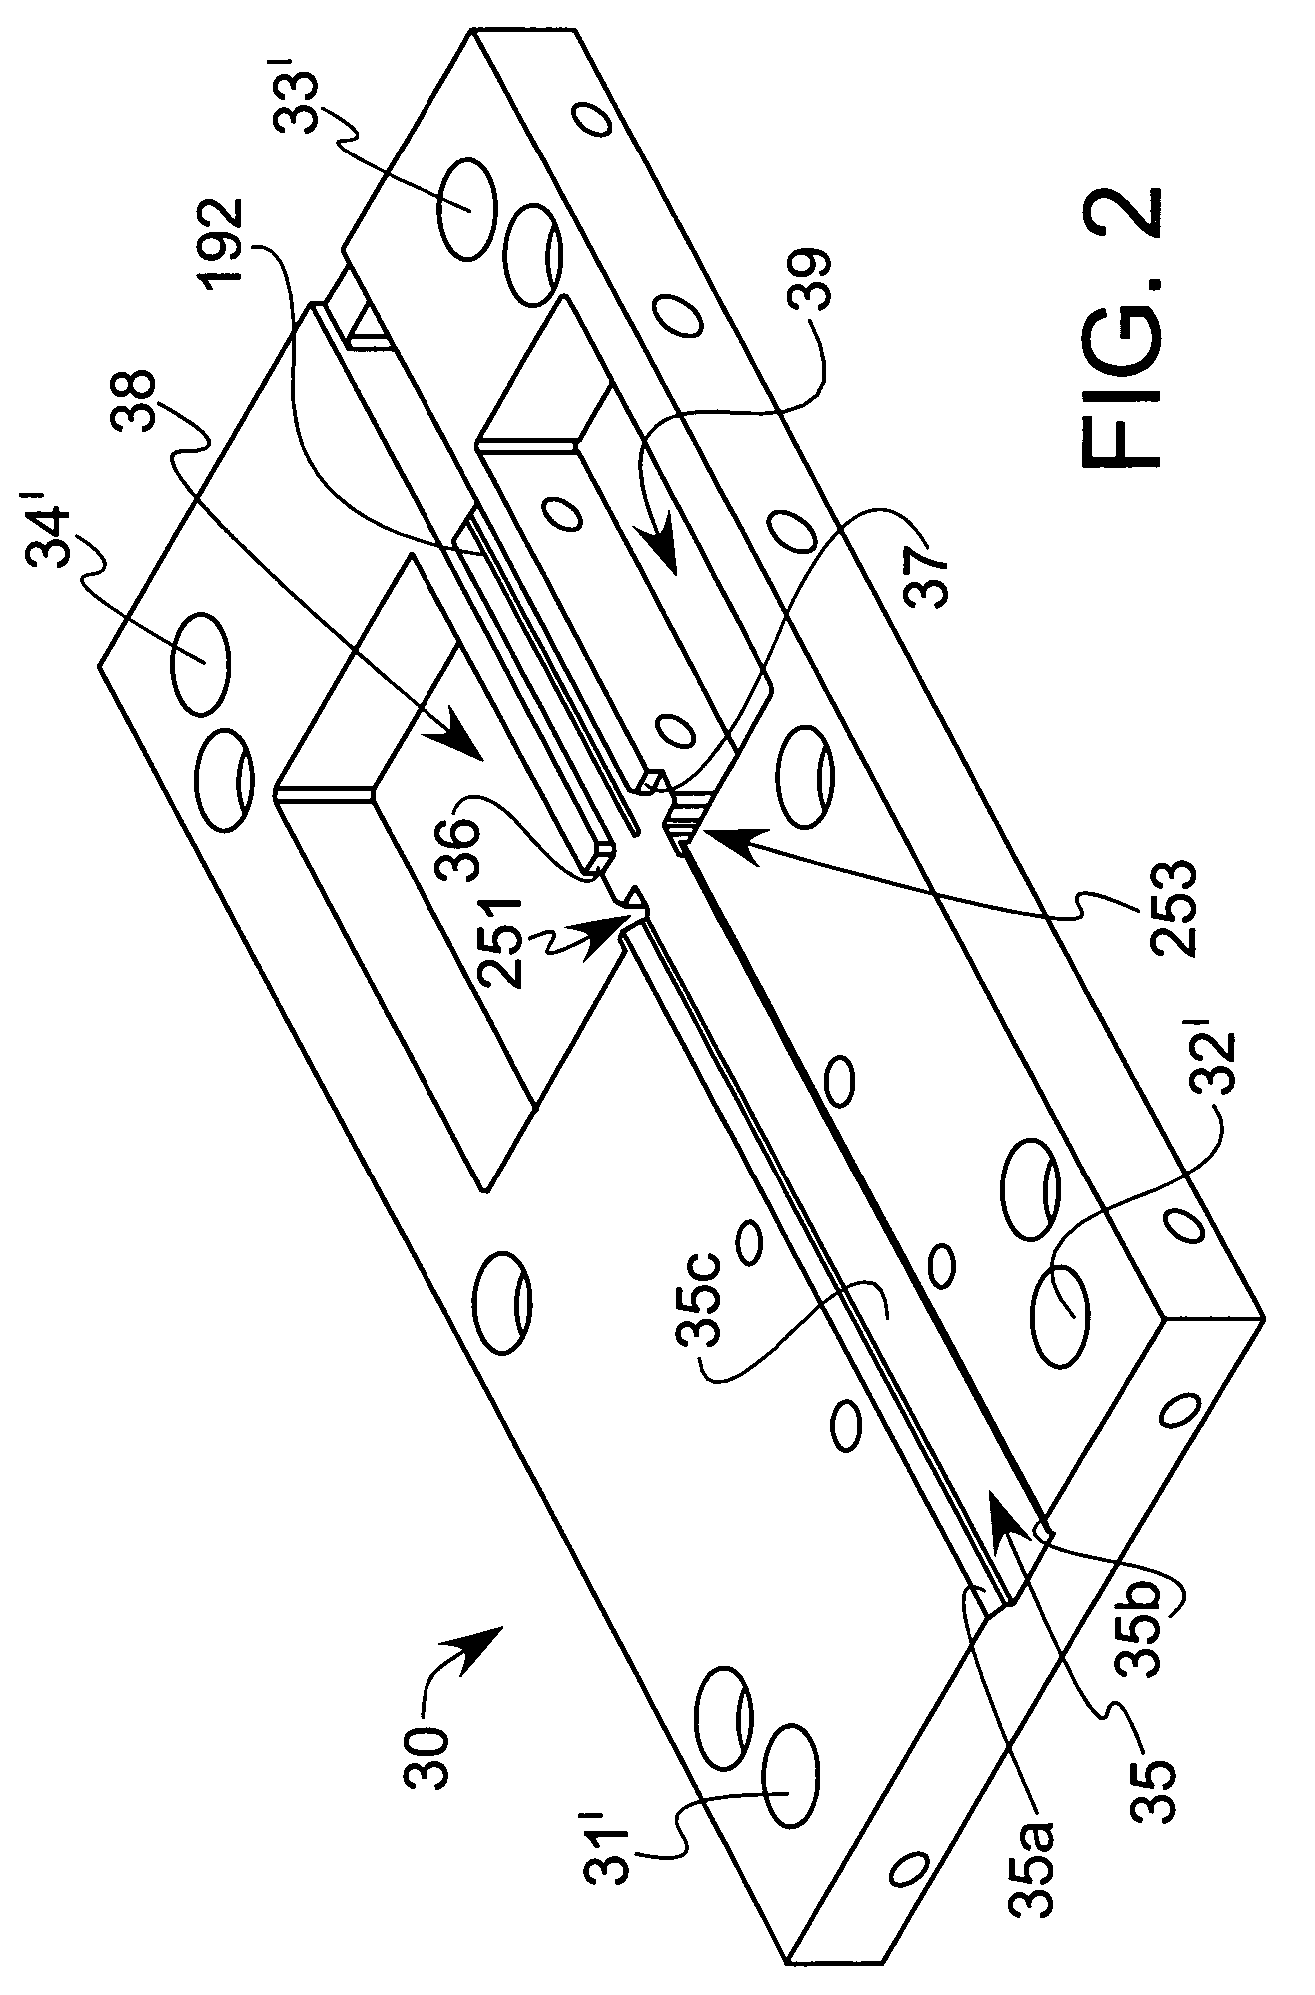 Apparatus and method for inserting staple drivers in a cartridge